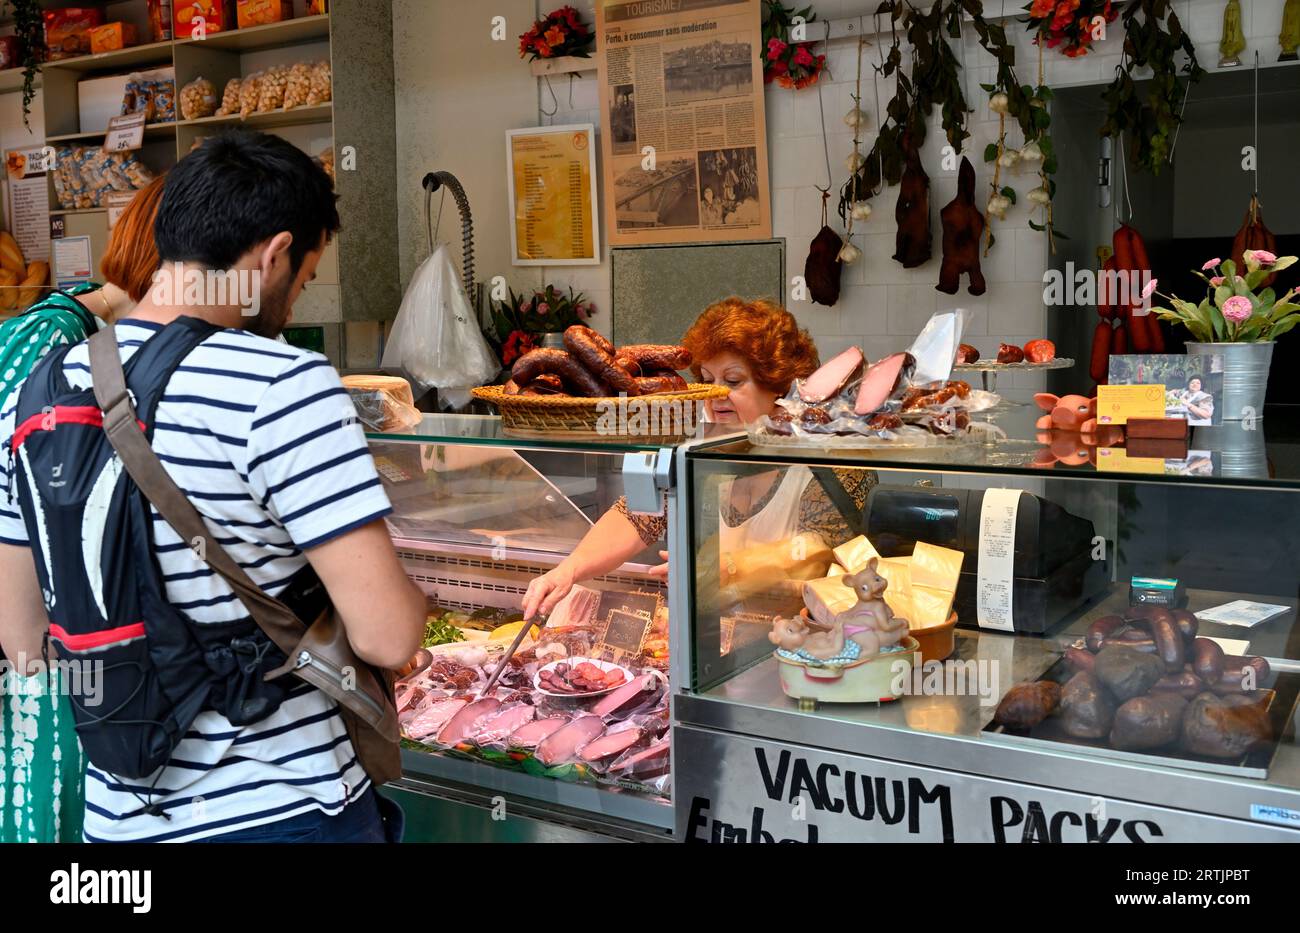 Woman in market stall using good hygiene practice selling variety of sausage and preserved meats serving couple Stock Photo